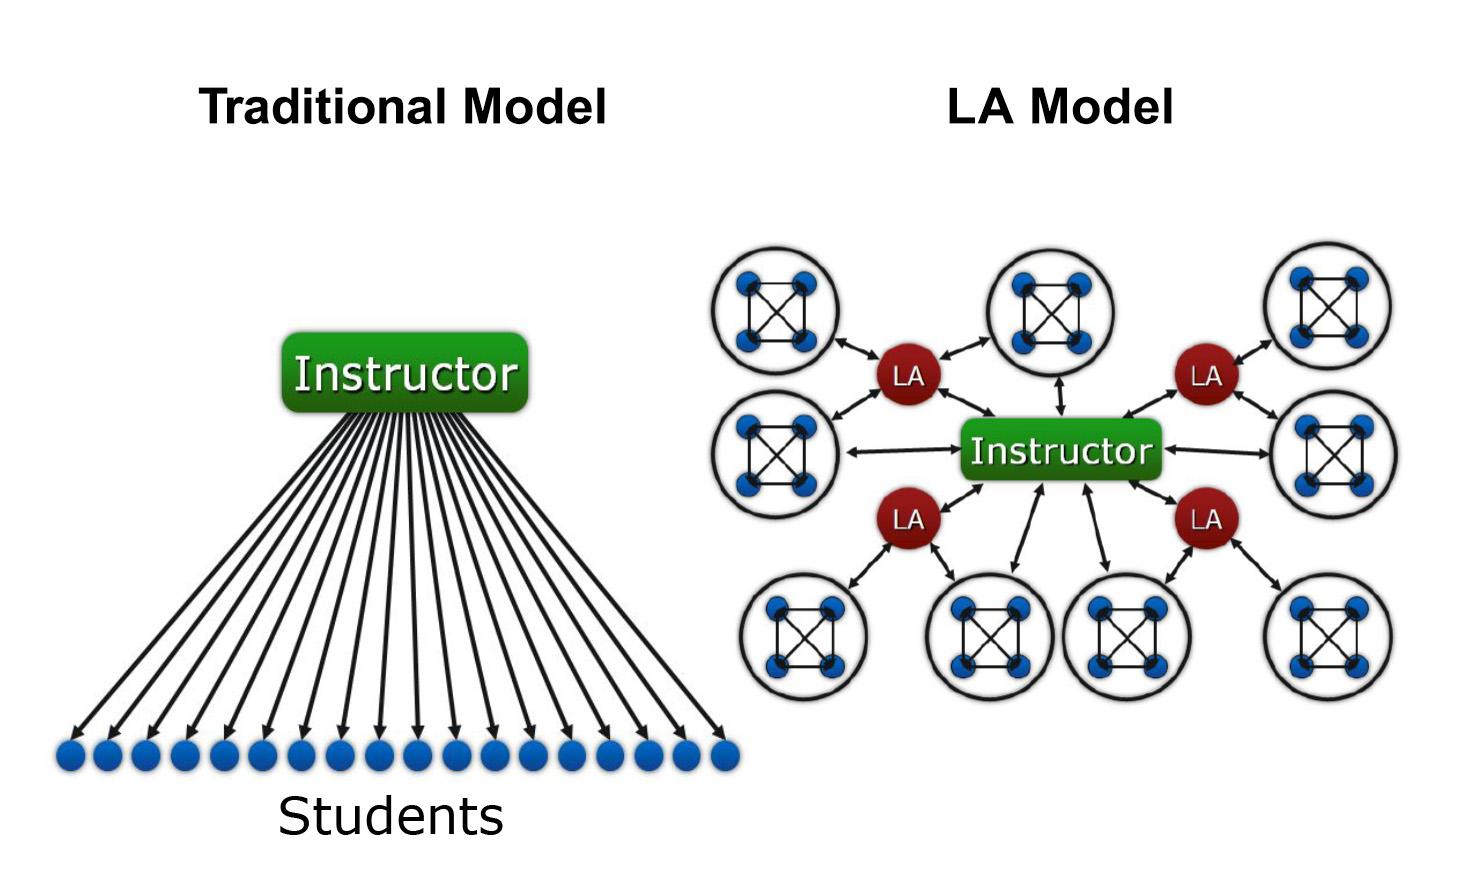 Chart showing the organization of traditional model of teaching versus the Learning Assistant model